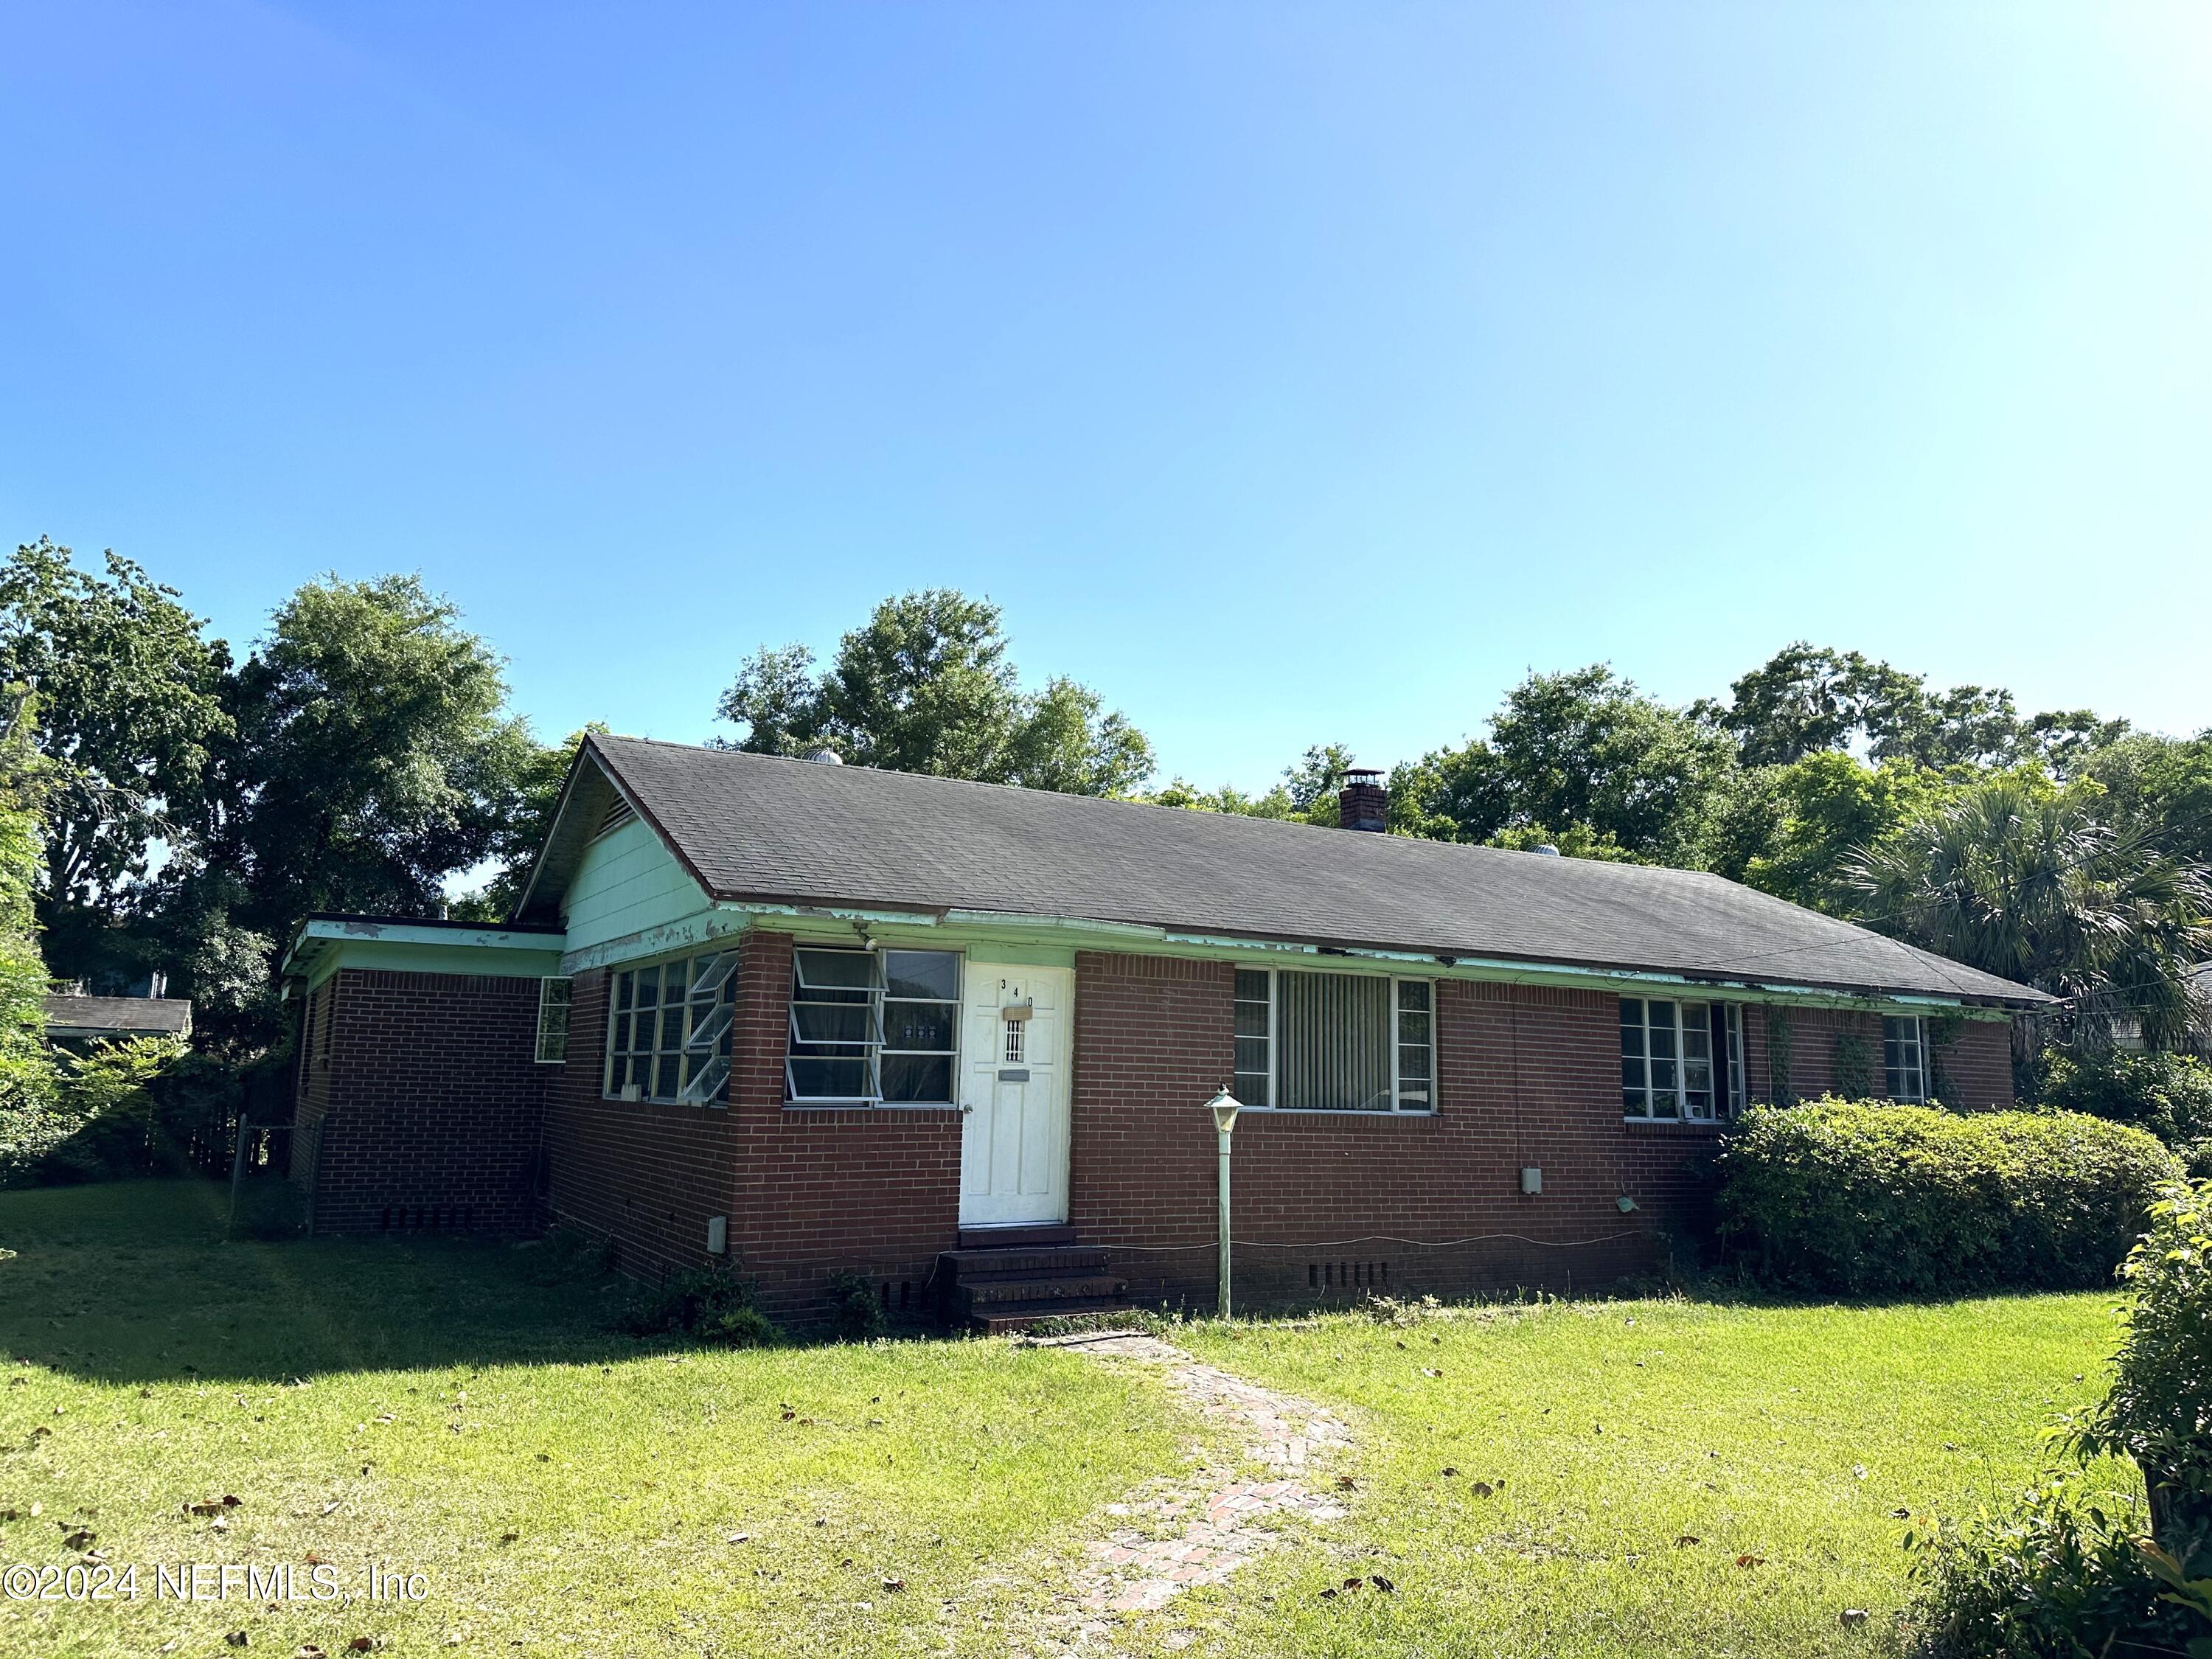 Jacksonville, FL home for sale located at 340 W 67th Street, Jacksonville, FL 32208